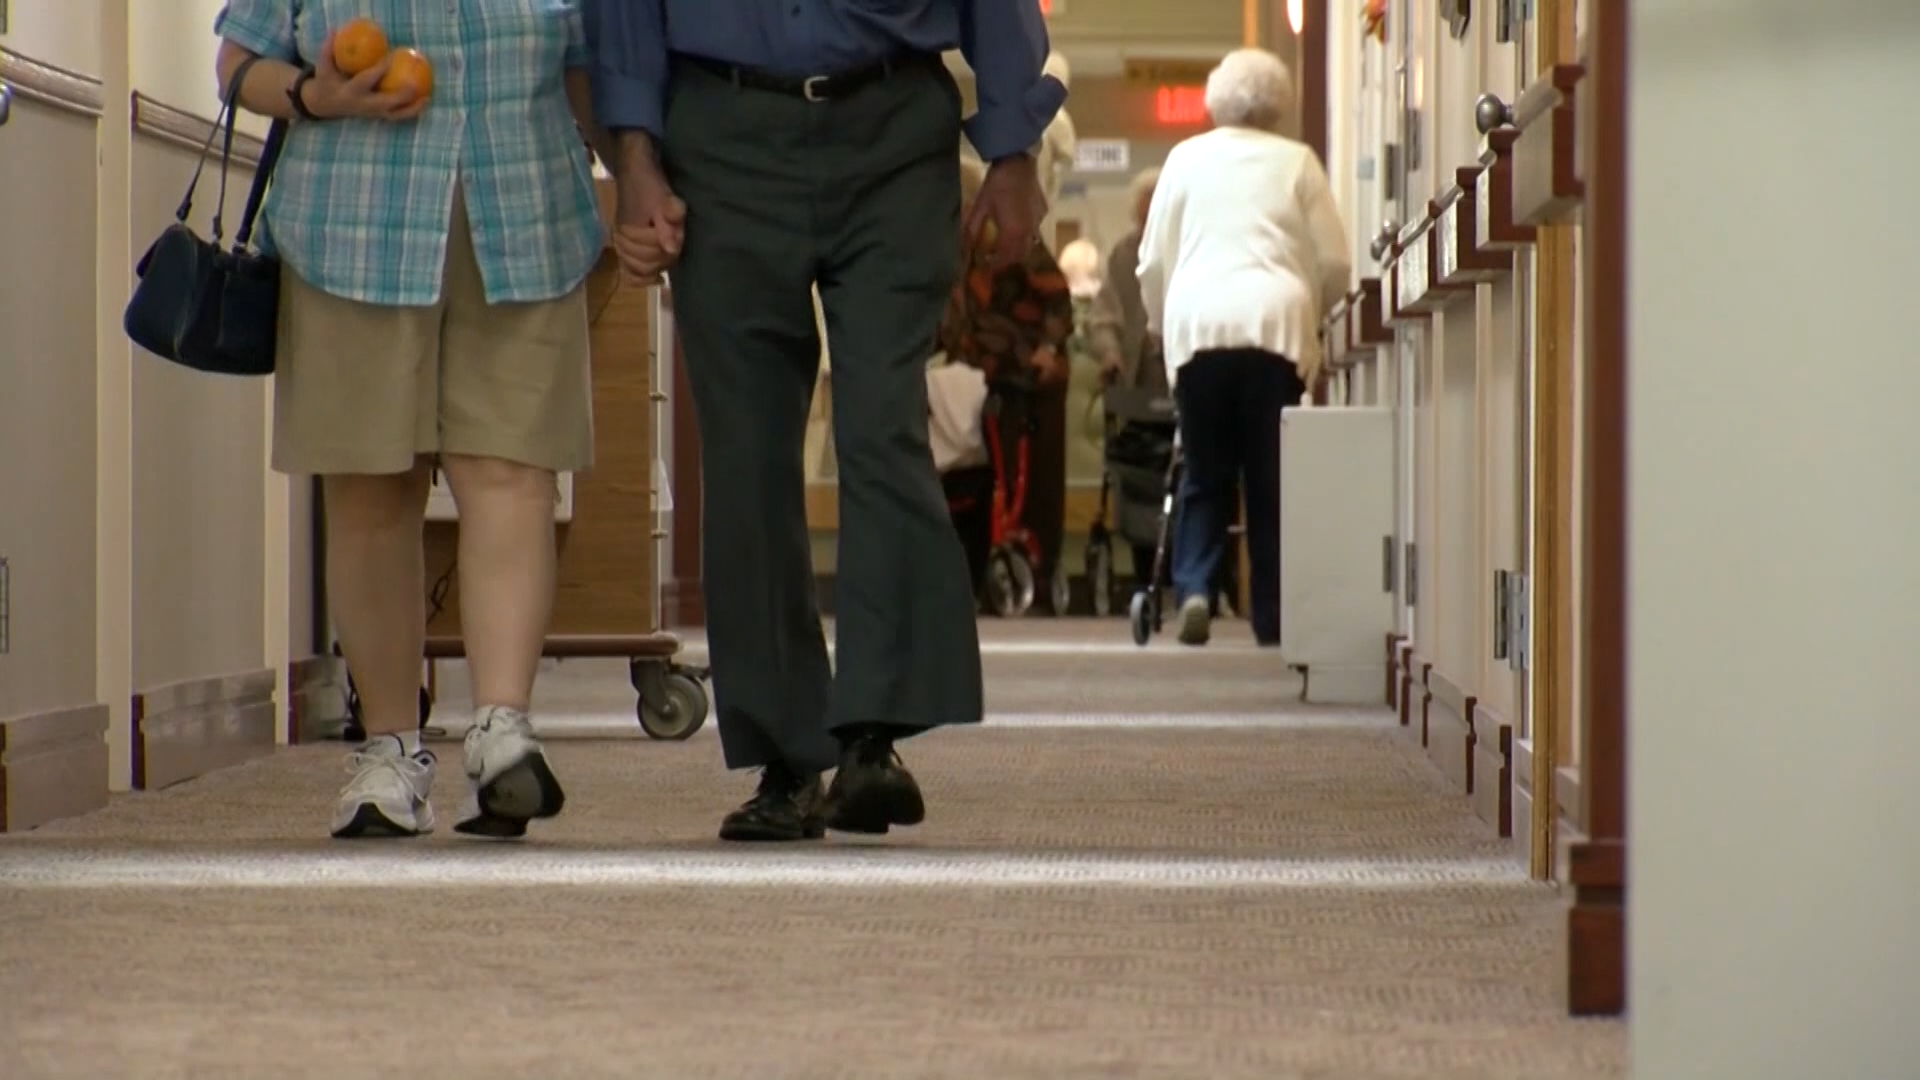 States are Preparing for an Aging Population. Federal Lawmakers are Looking to Give Them a Boost